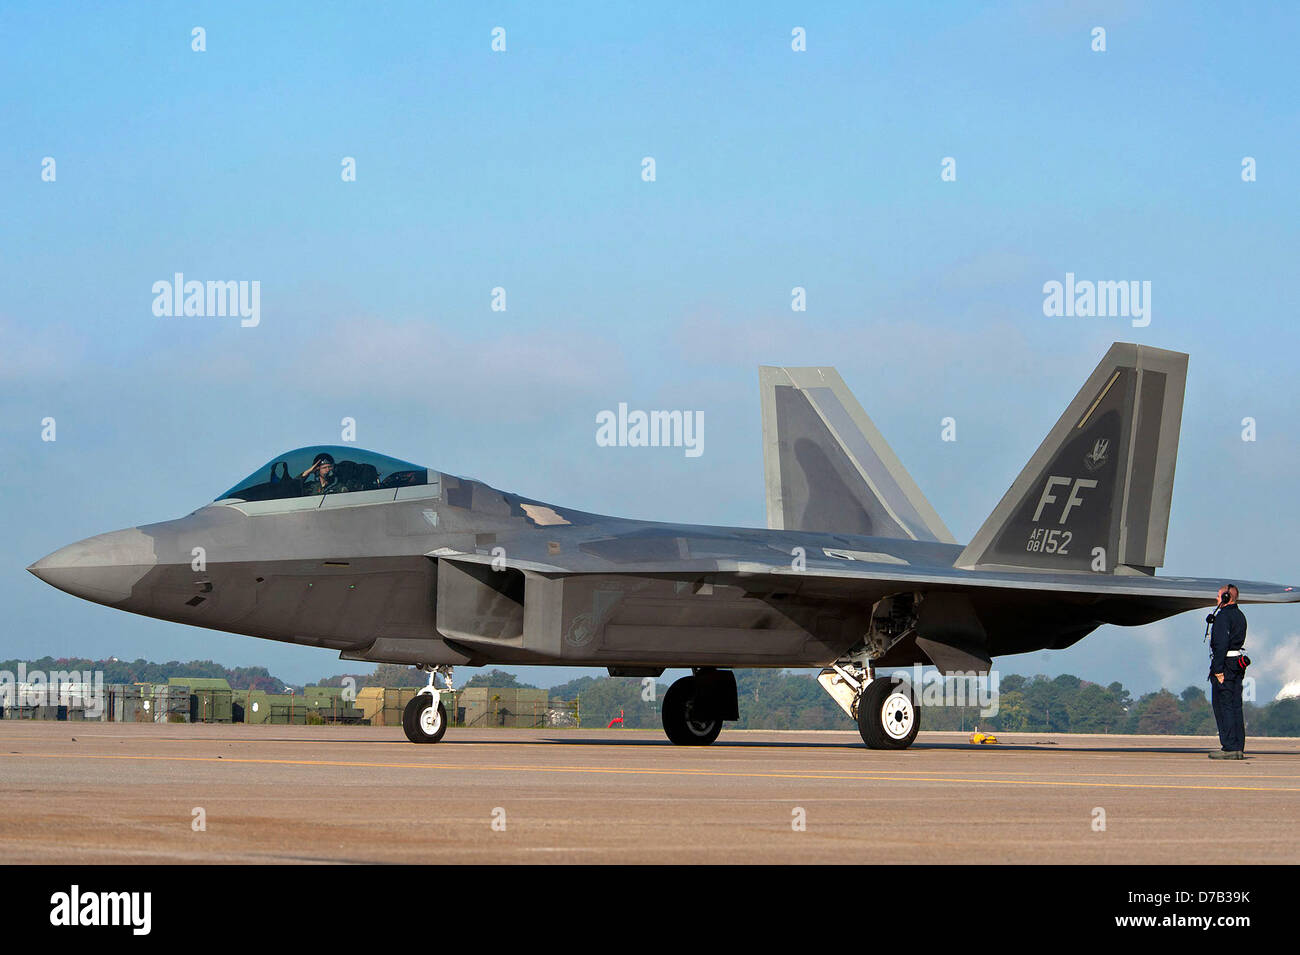 A US Air Force F-22 Raptor stealth fighter aircraft taxi to take off October 25, 2012 at Langley Air Force Base, VA. Stock Photo